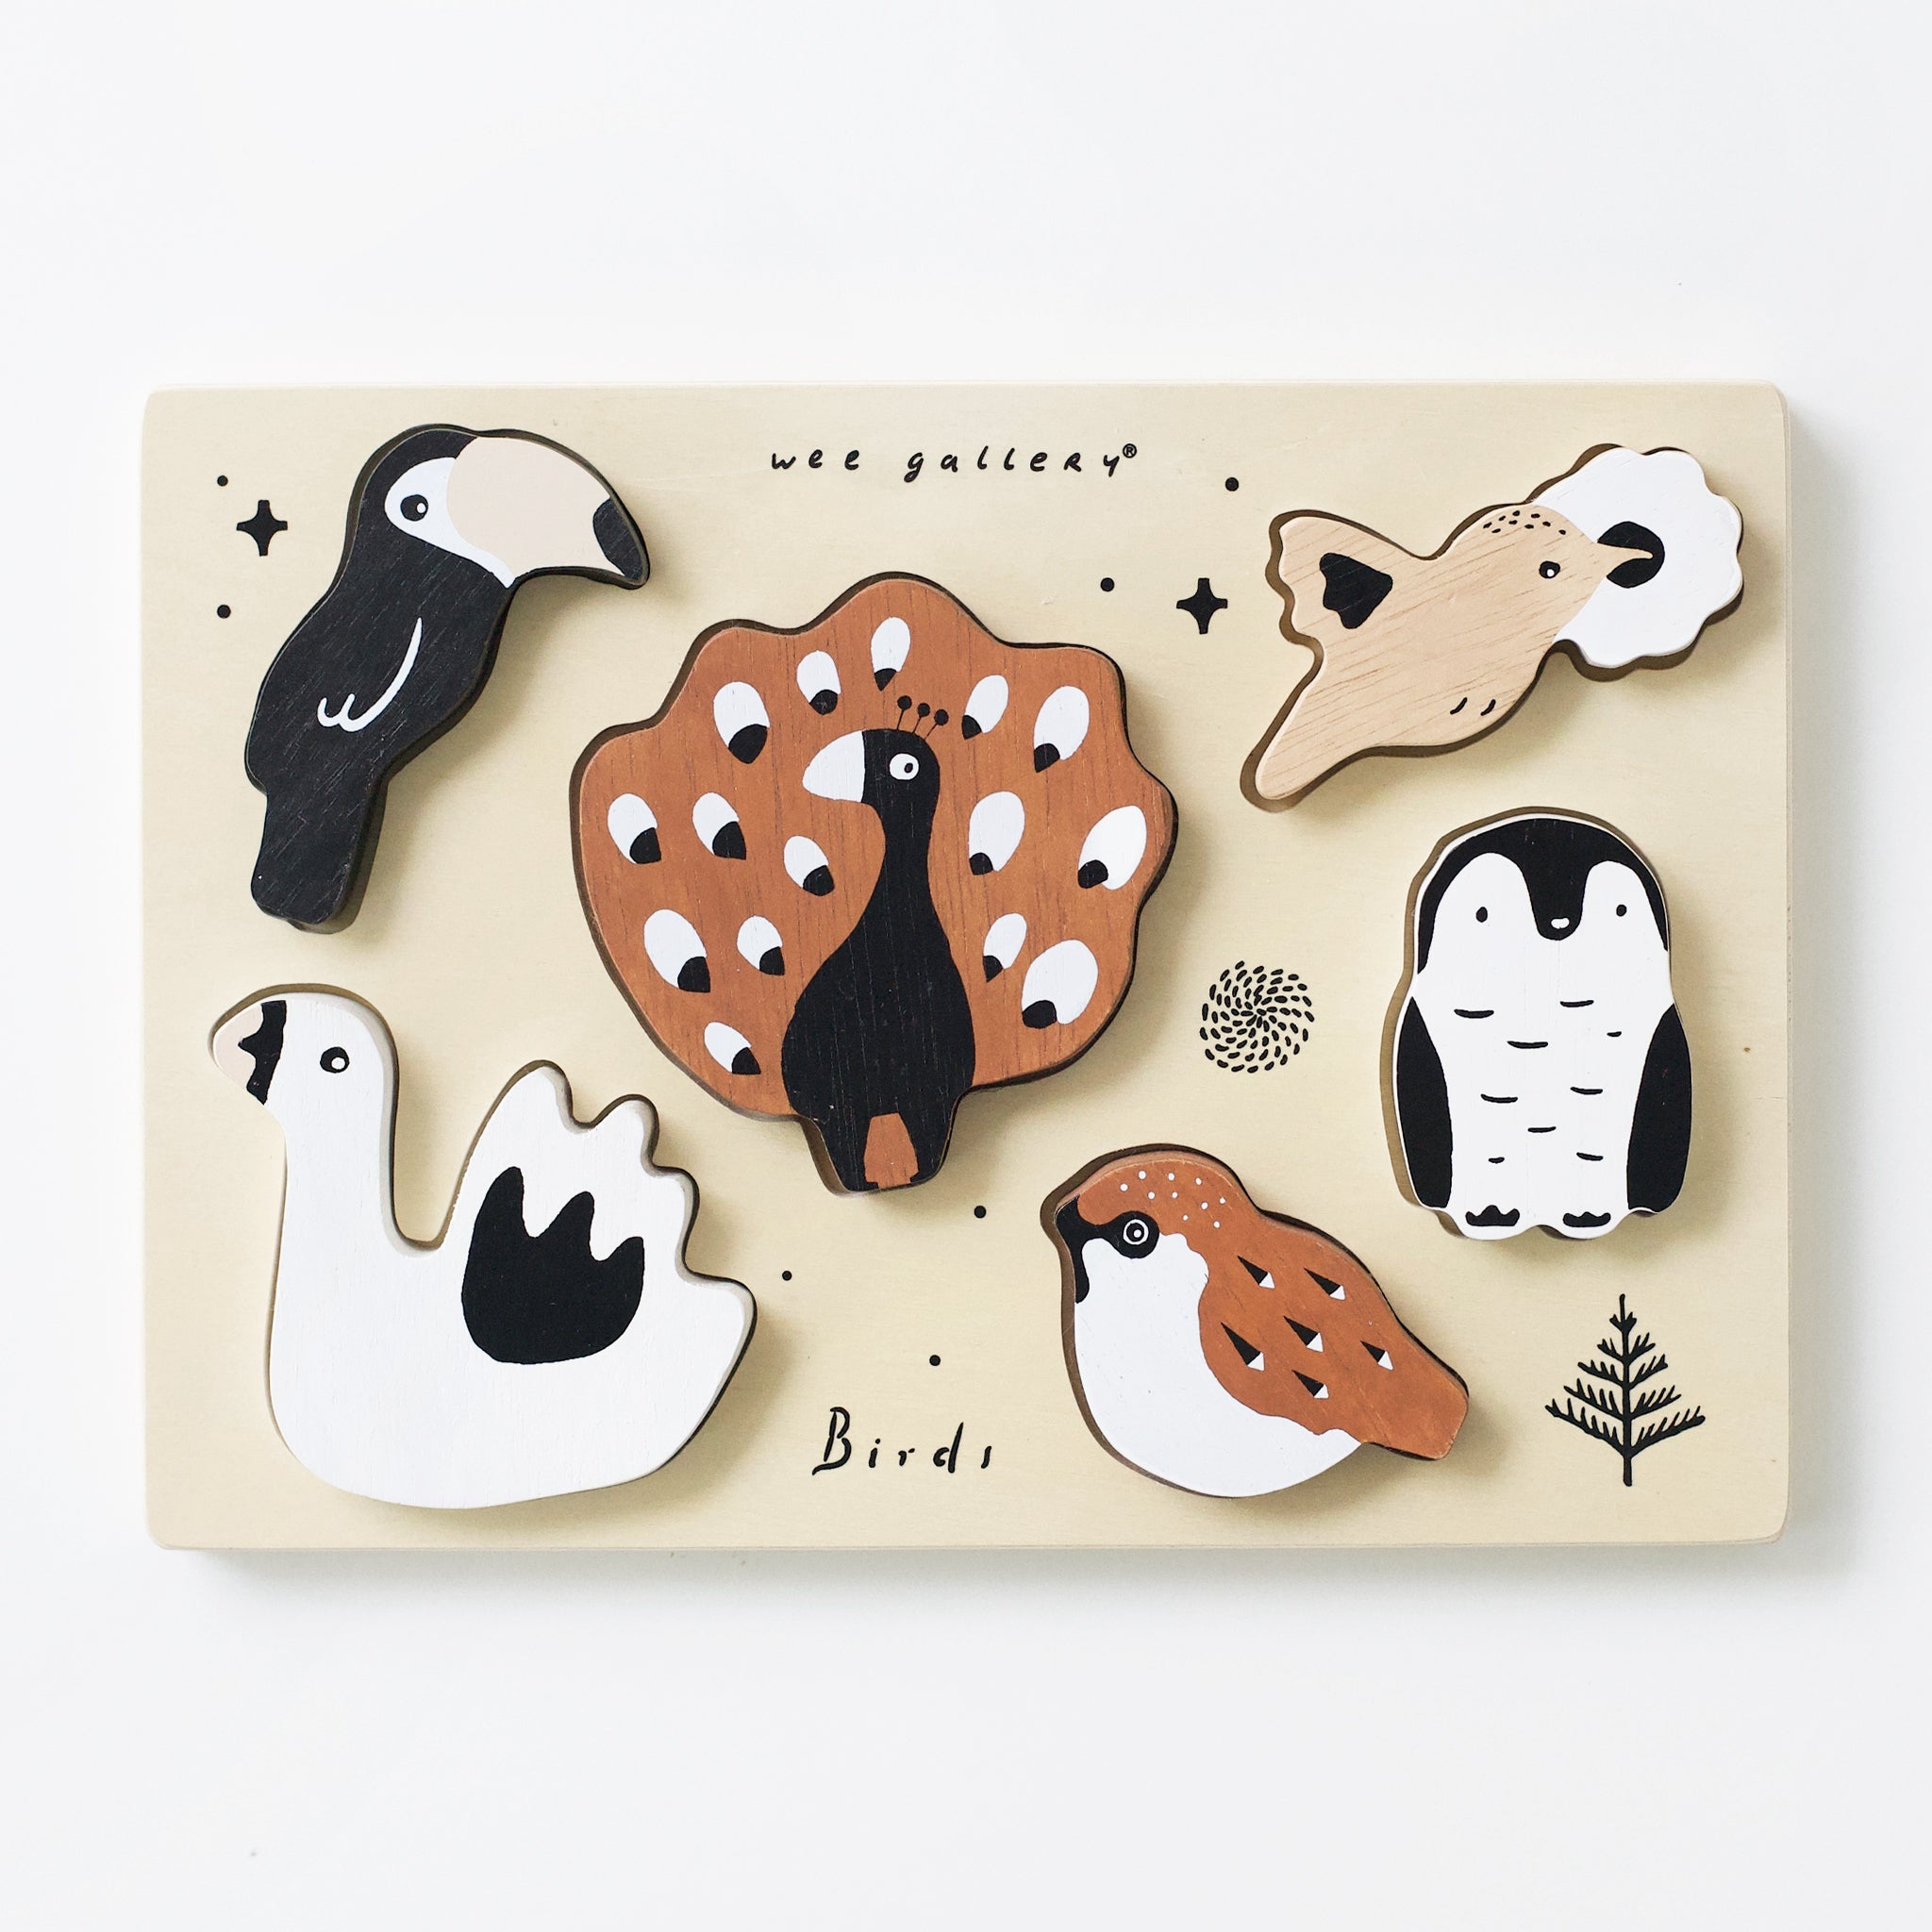 wee-gallery-tray-puzzle-wooden-pieces-birds-wood-toy-2_d3635509-09bb-4ecc-b2d3-1a58fcf5ac4b.jpg